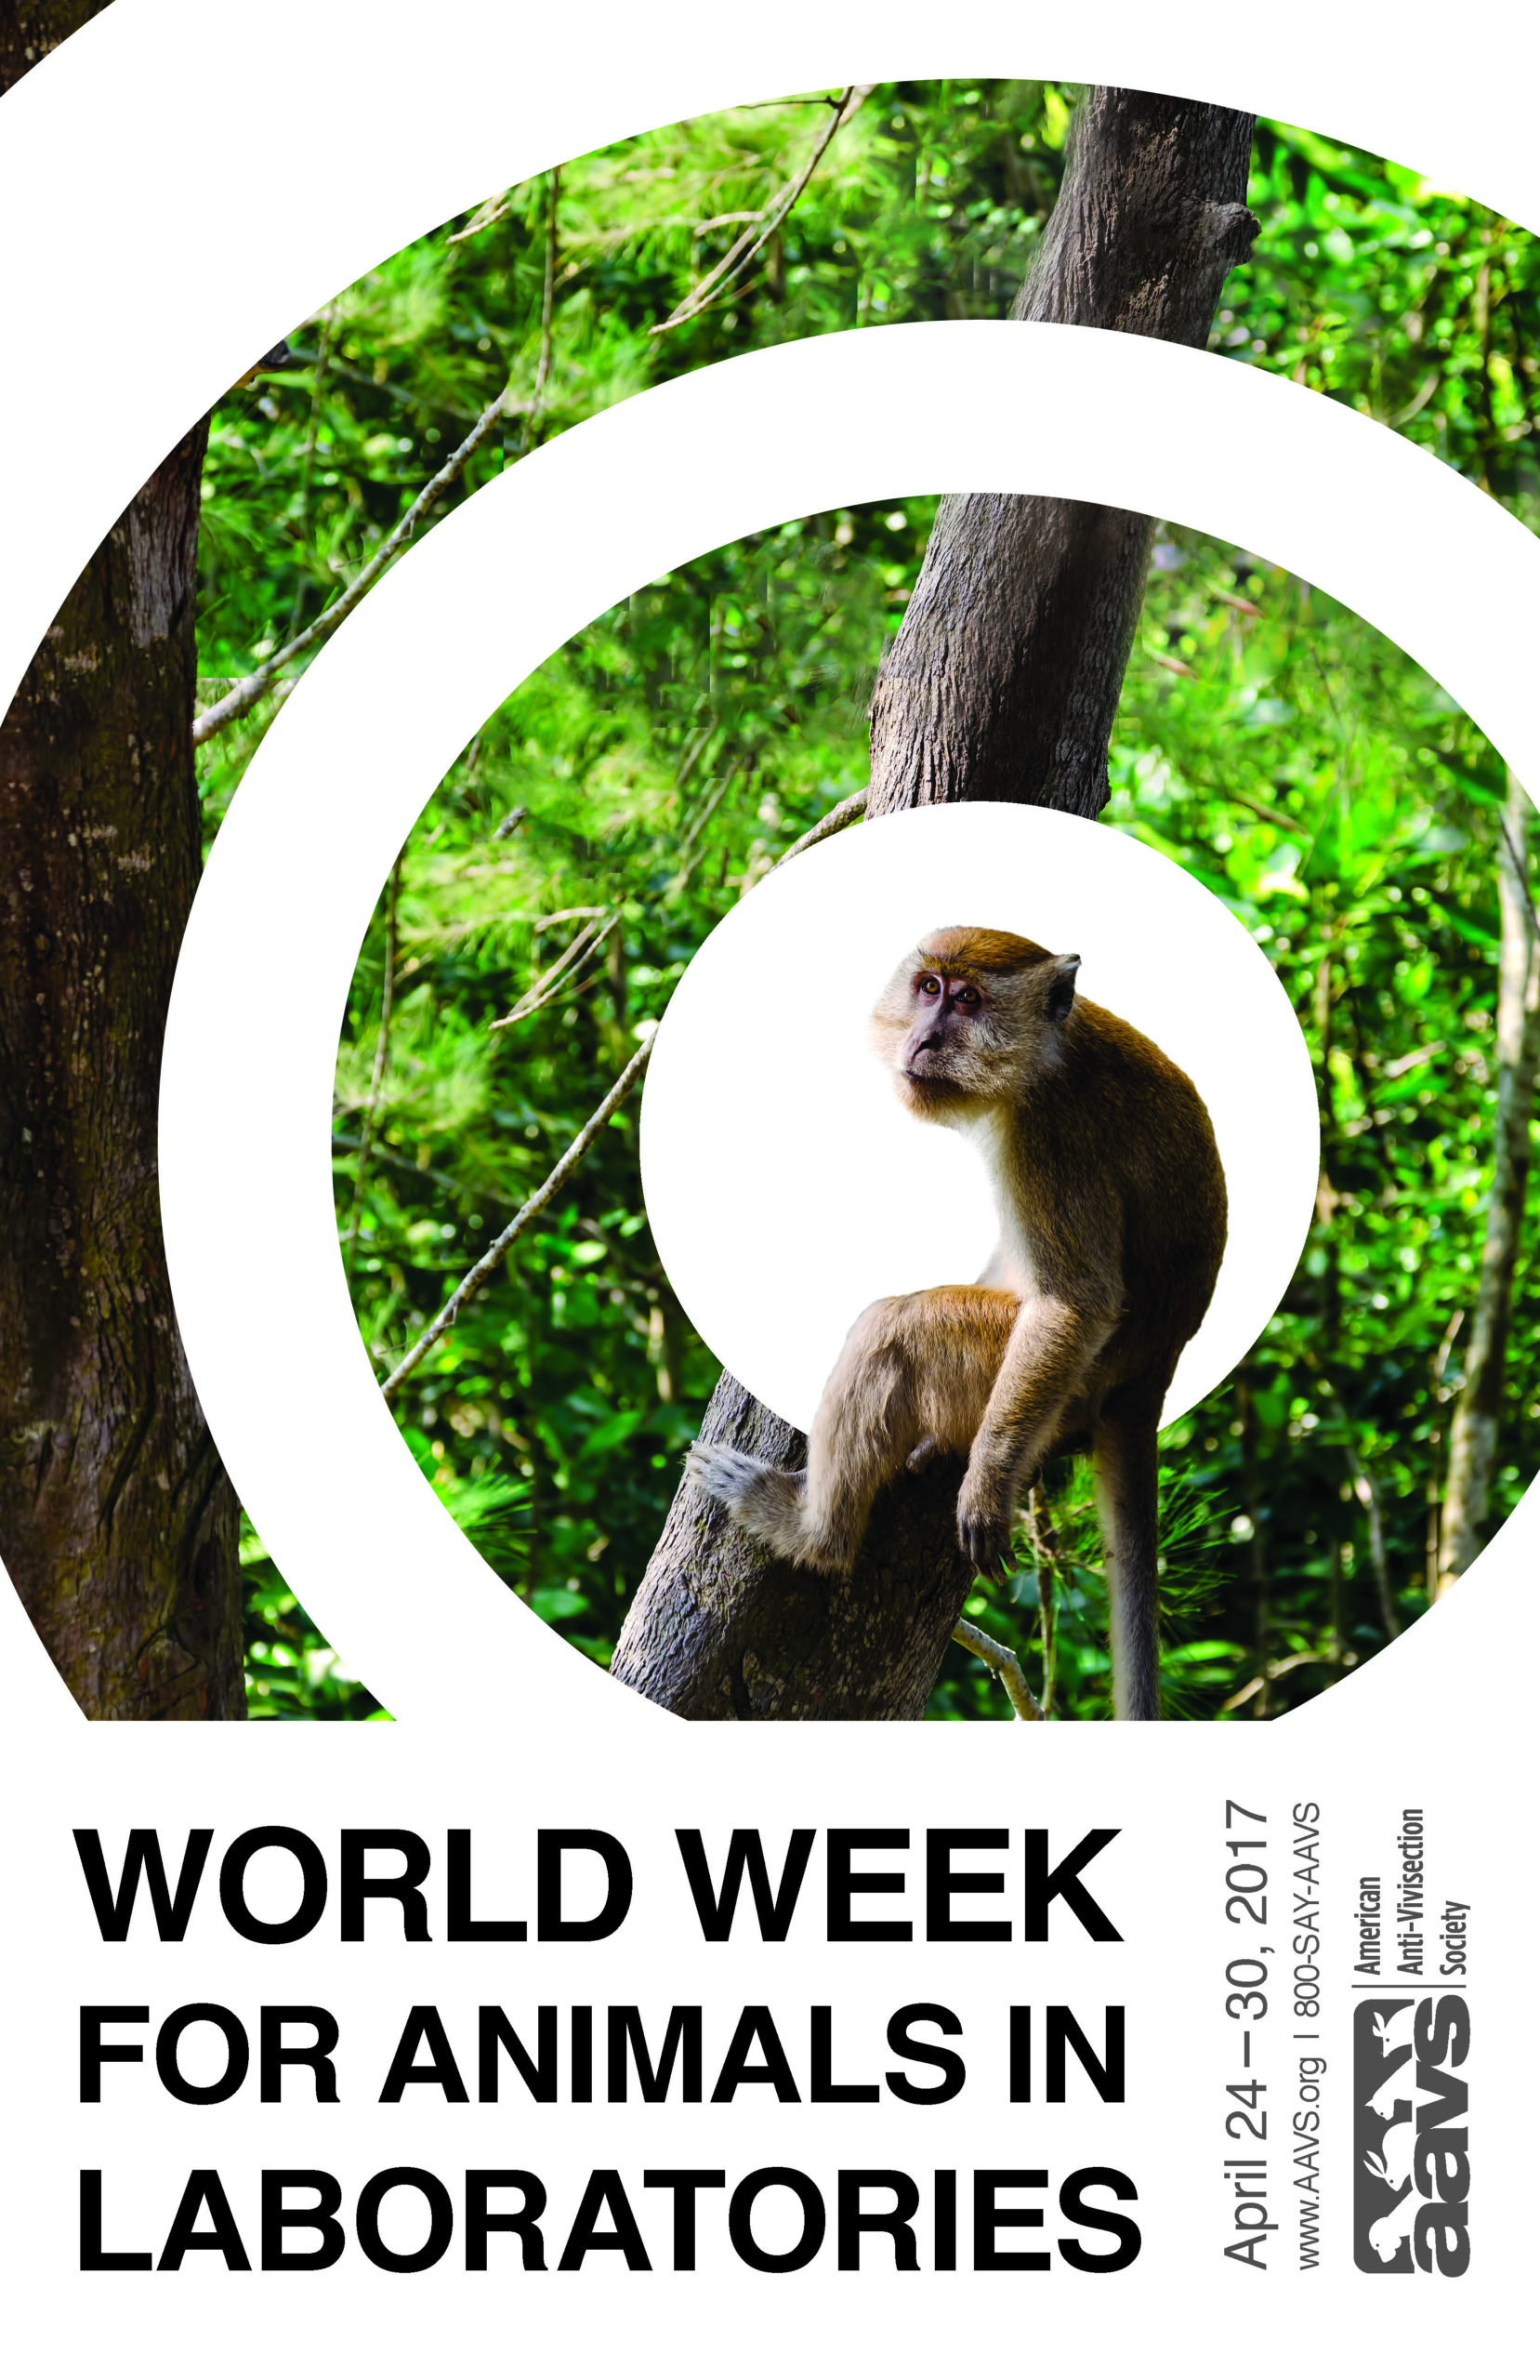 AAVS - Poster - World Week for Animals in Laboratories - Monkey